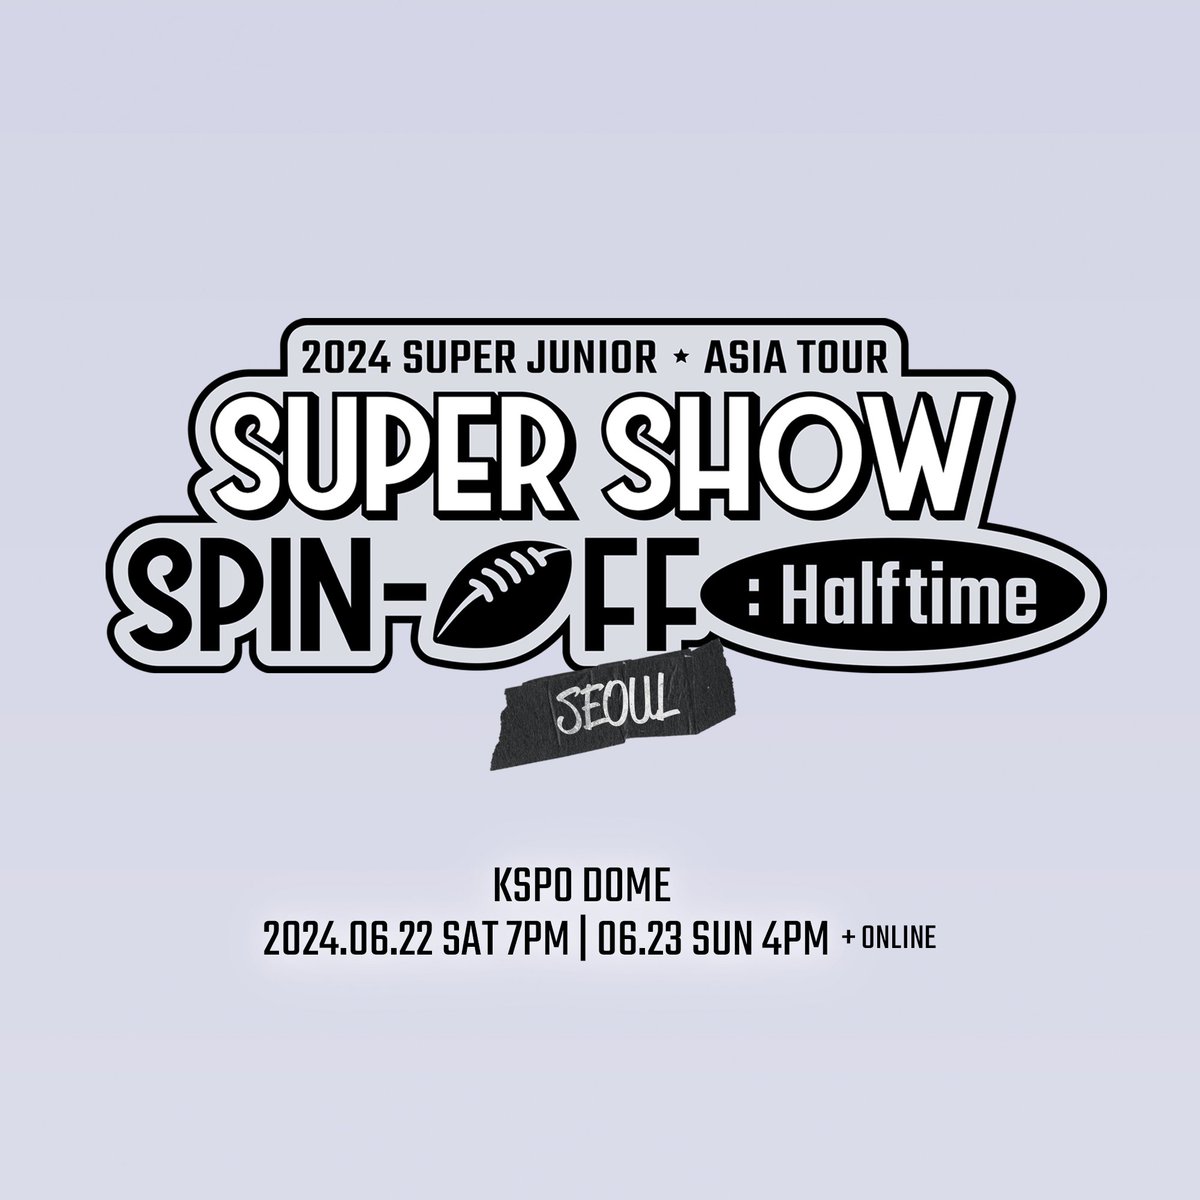 2024 SUPER JUNIOR <SUPER SHOW SPIN-OFF : Halftime> in SEOUL 시야제한석 추가 오픈 안내 🎉 (Additional Ticket Opening of Obstructed View Seats) 📅 2024.06.22(SAT) 7PM (KST) 📅 2024.06.23(SUN) 4PM (KST) 📍KSPO DOME 🎫 2024.05.13(MON) 8PM(KST) 🔗 bit.ly/3UvSCOe